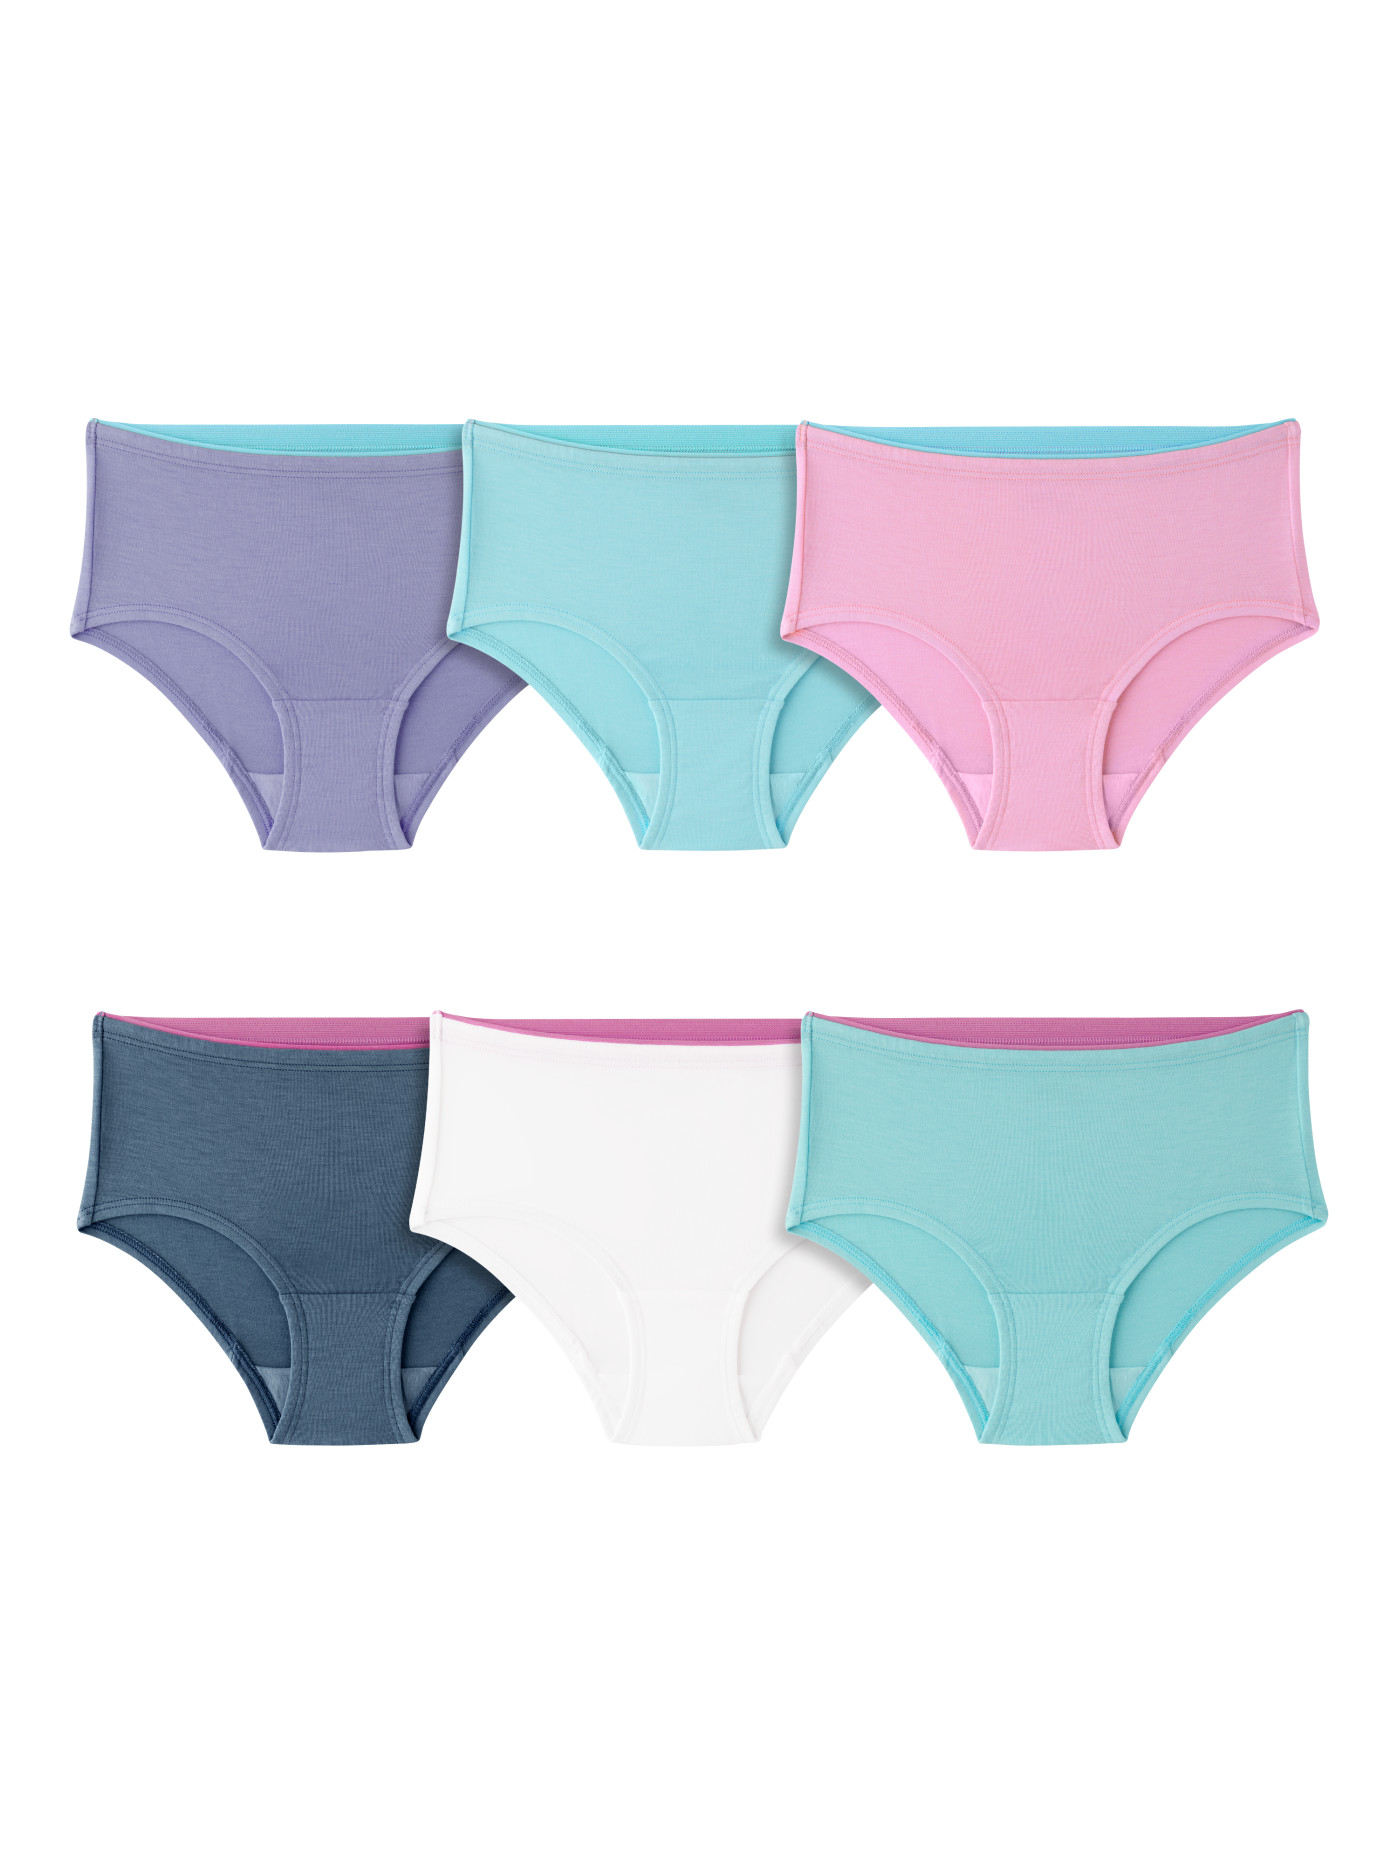 Fruit of the Loom Girls' Tag Free Cotton Brief Underwear